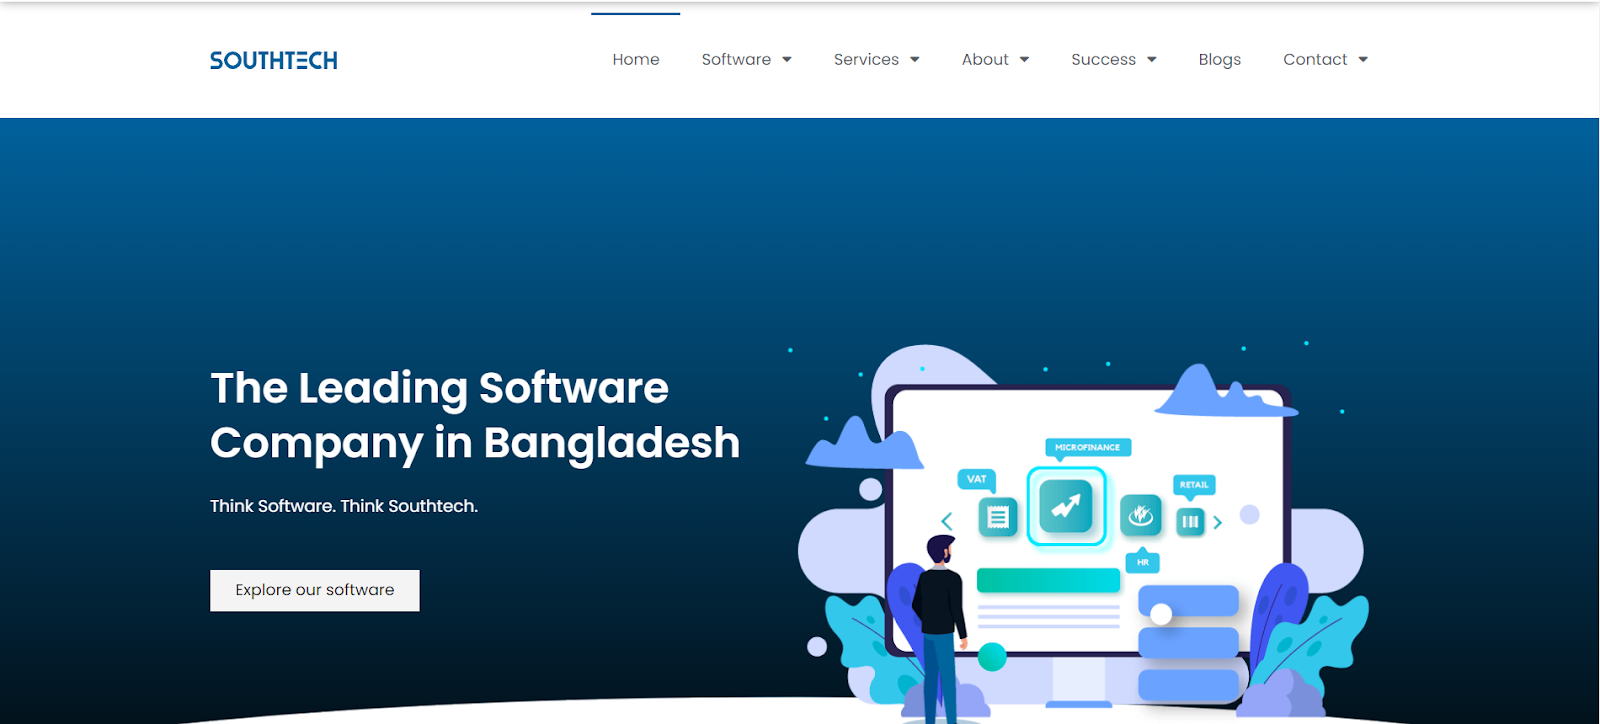 Southtech has contributed to the software industry in Bangladesh